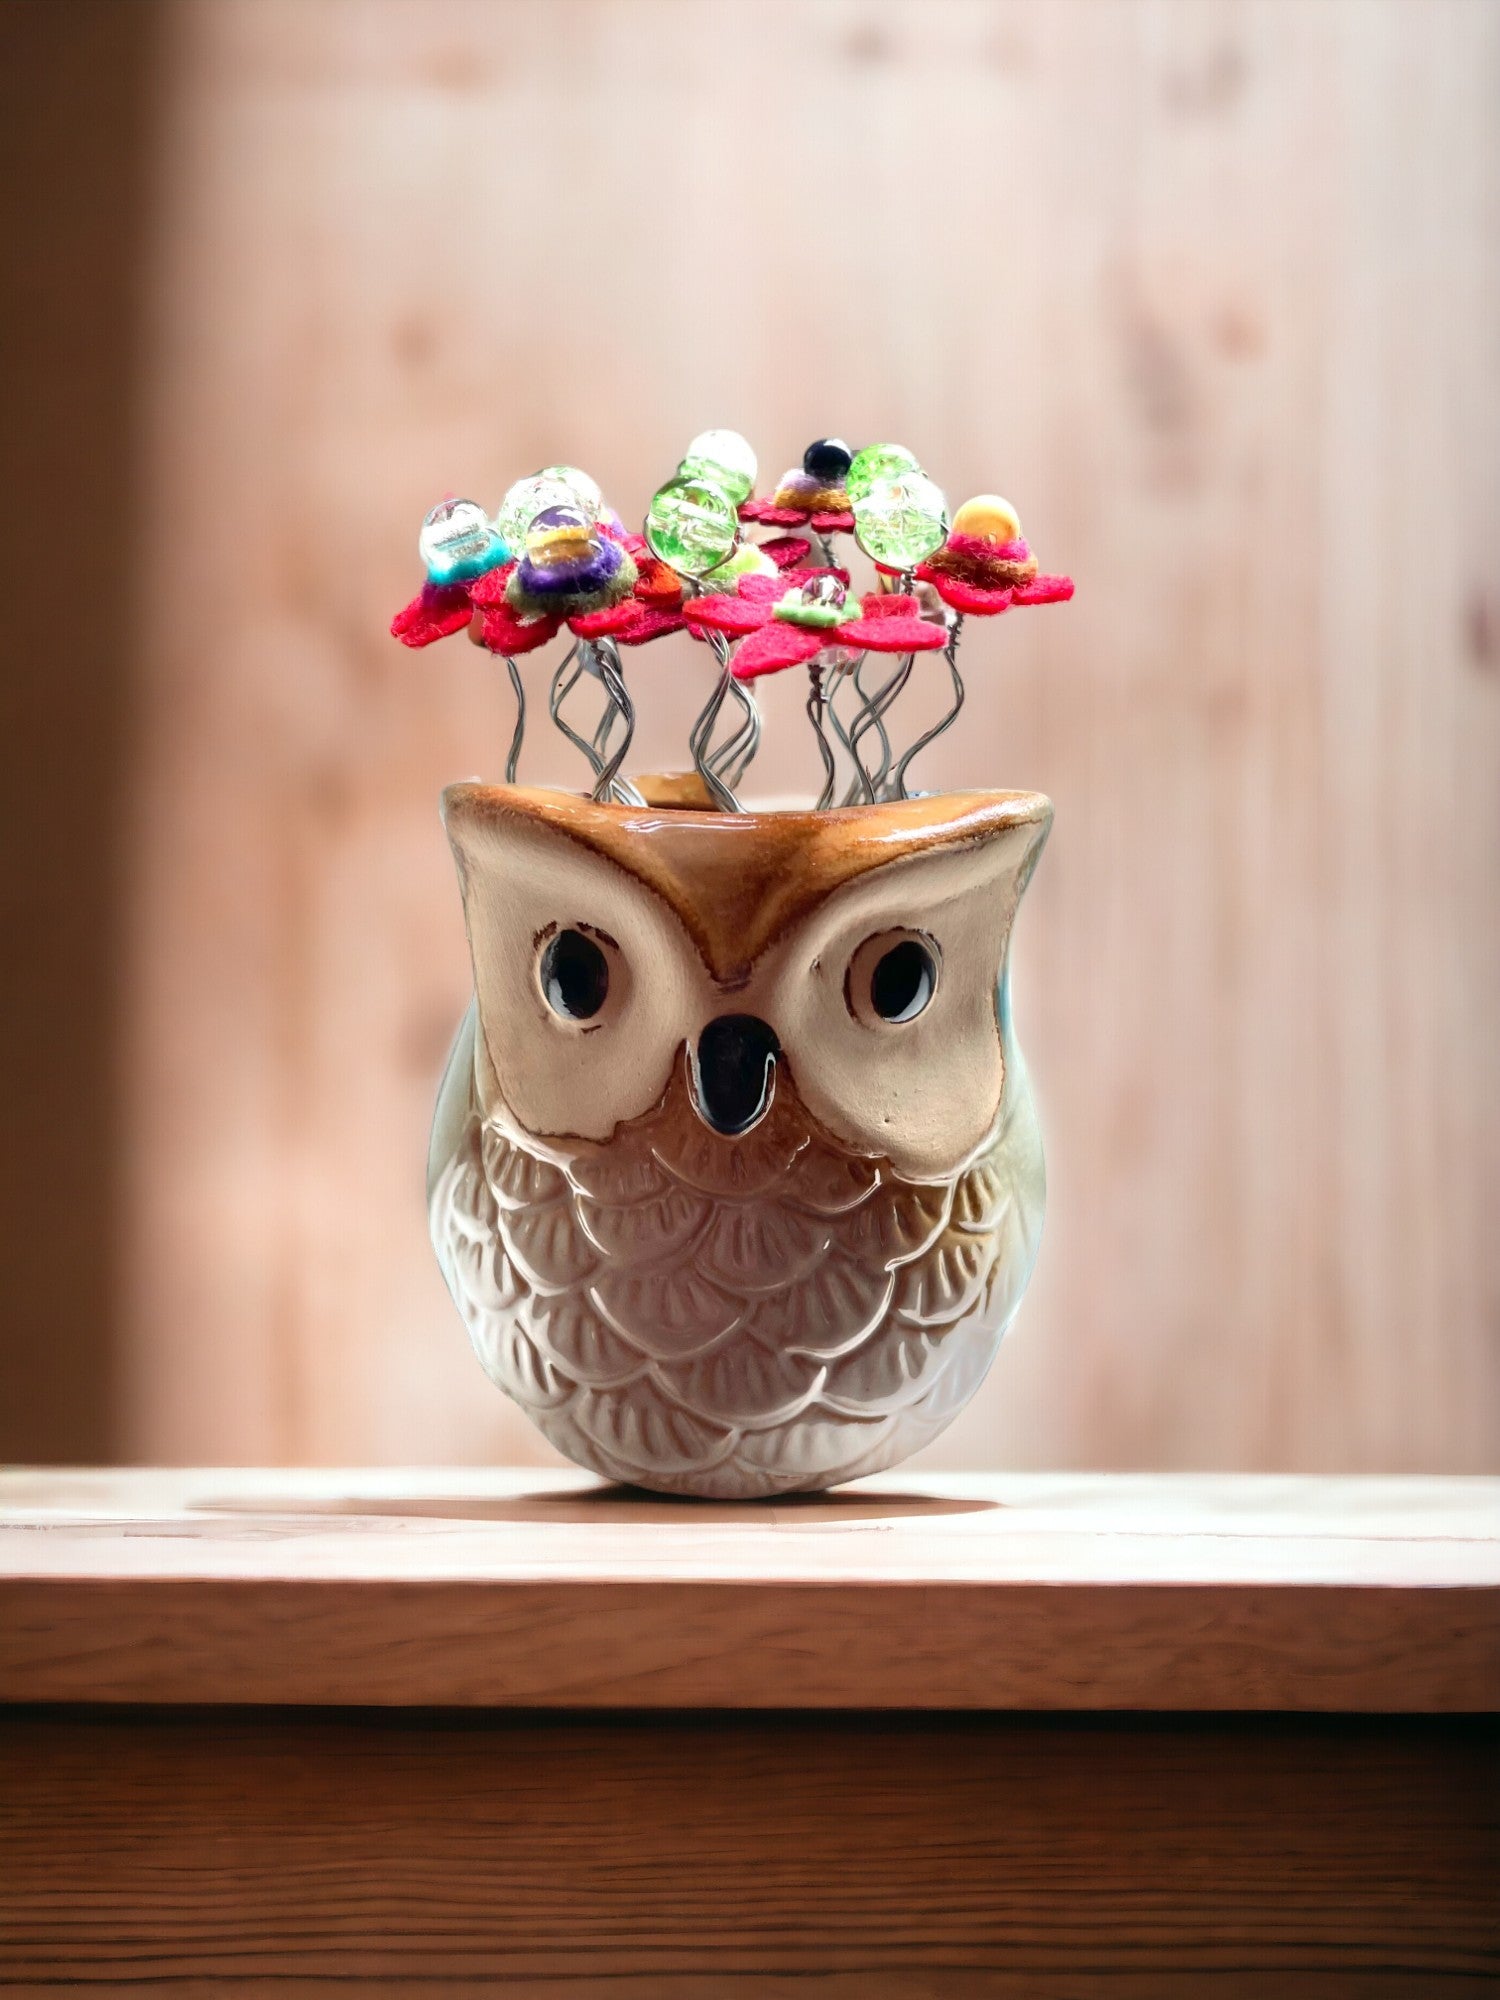 Blue and Beige Owl with Red Felt Flowers